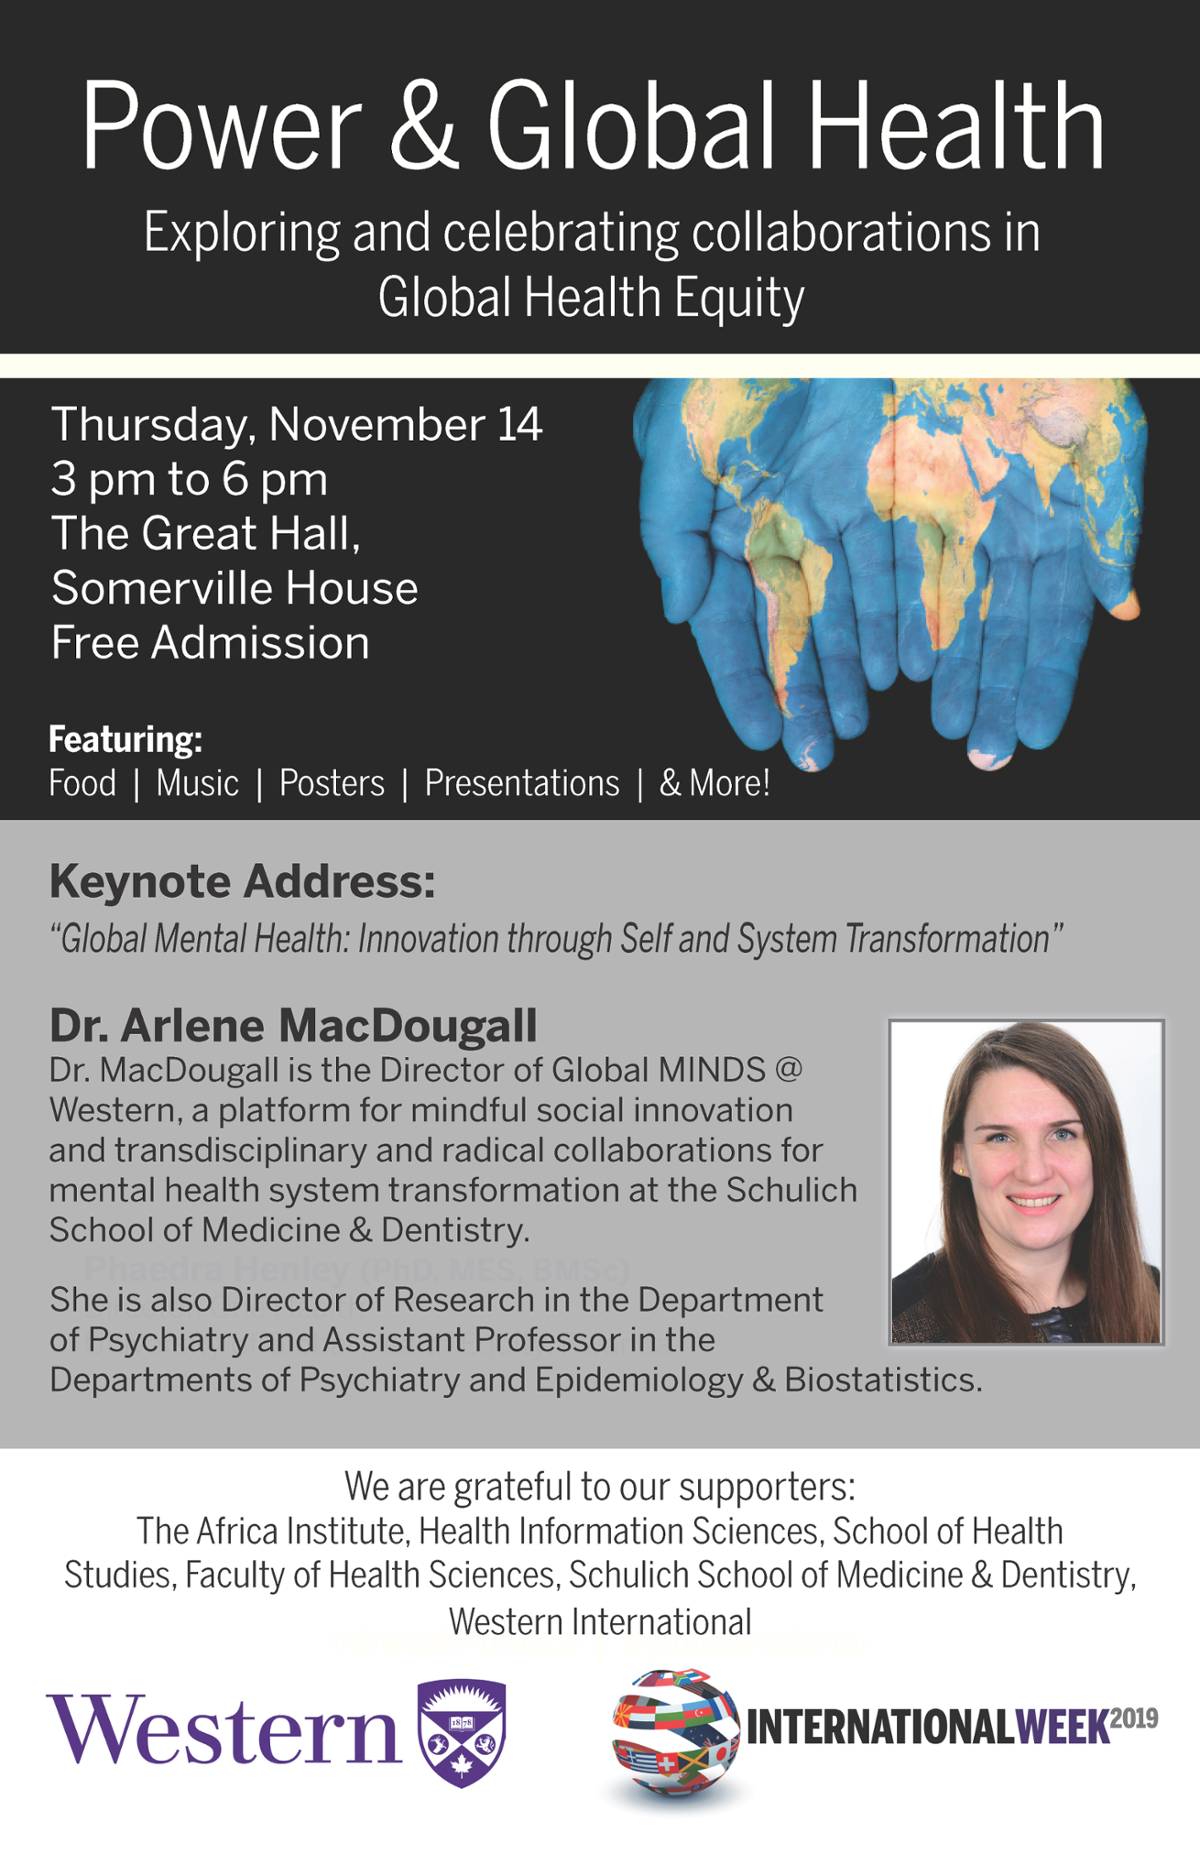 Power and Global Health Event